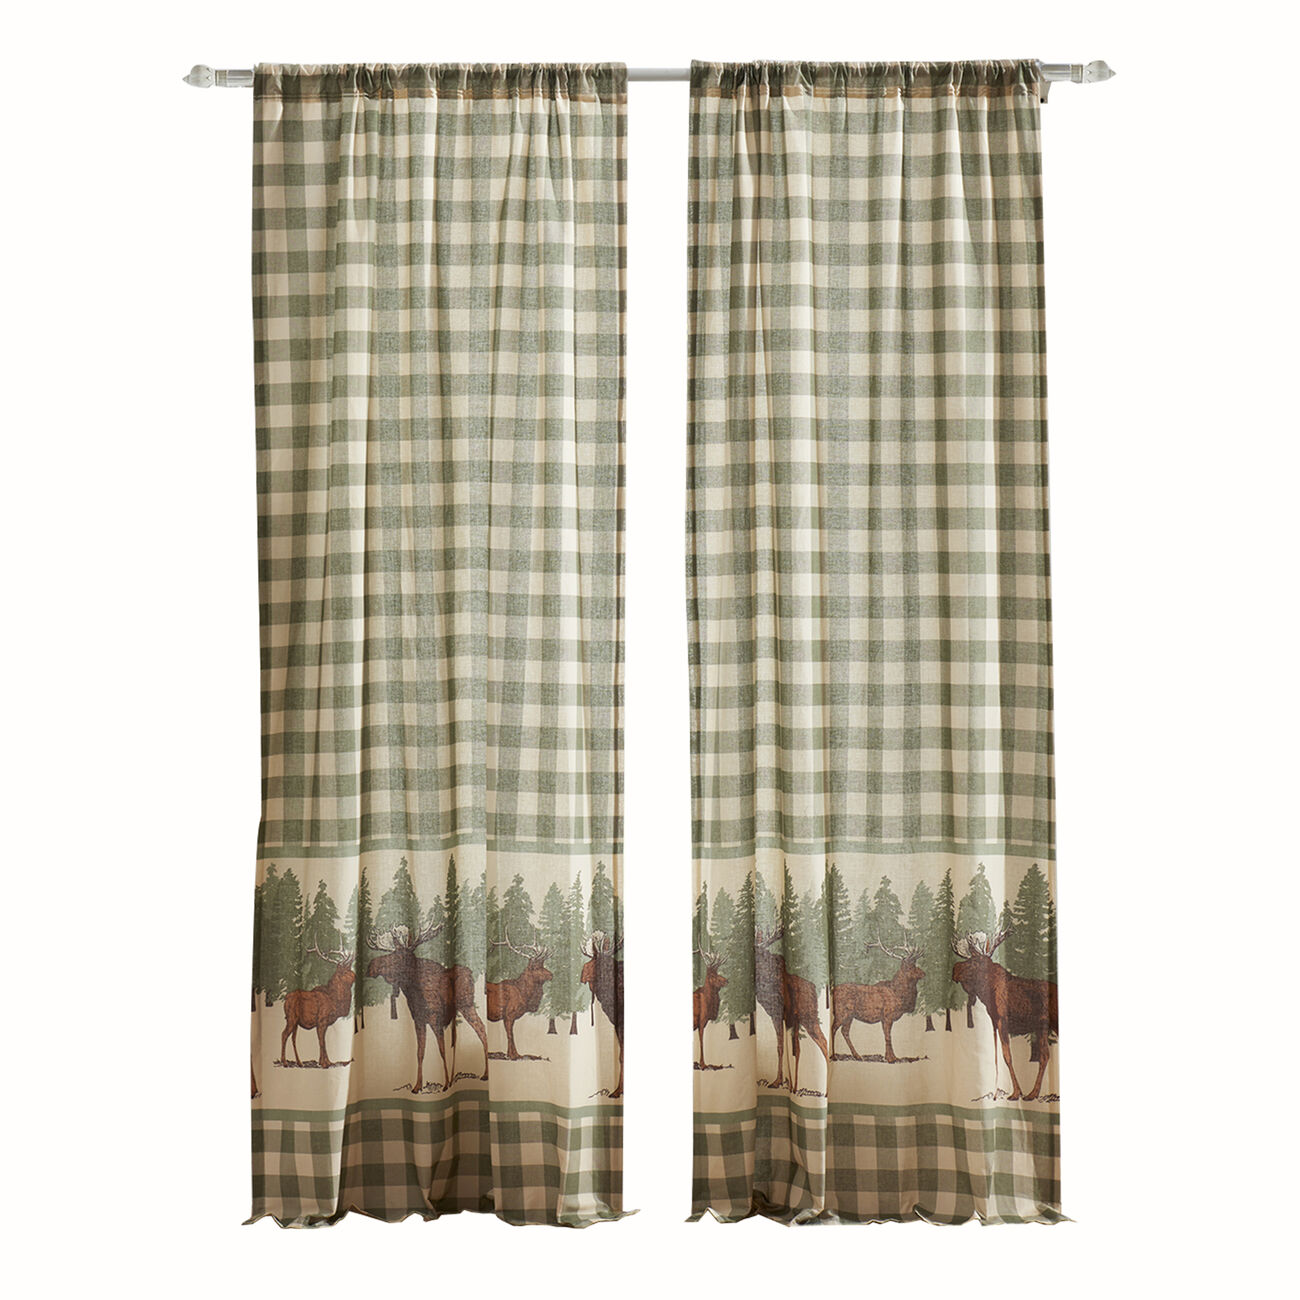 Fabric Panel Curtain with Animal and Plaid Print, Set of 4, Brown and Green - BM223382